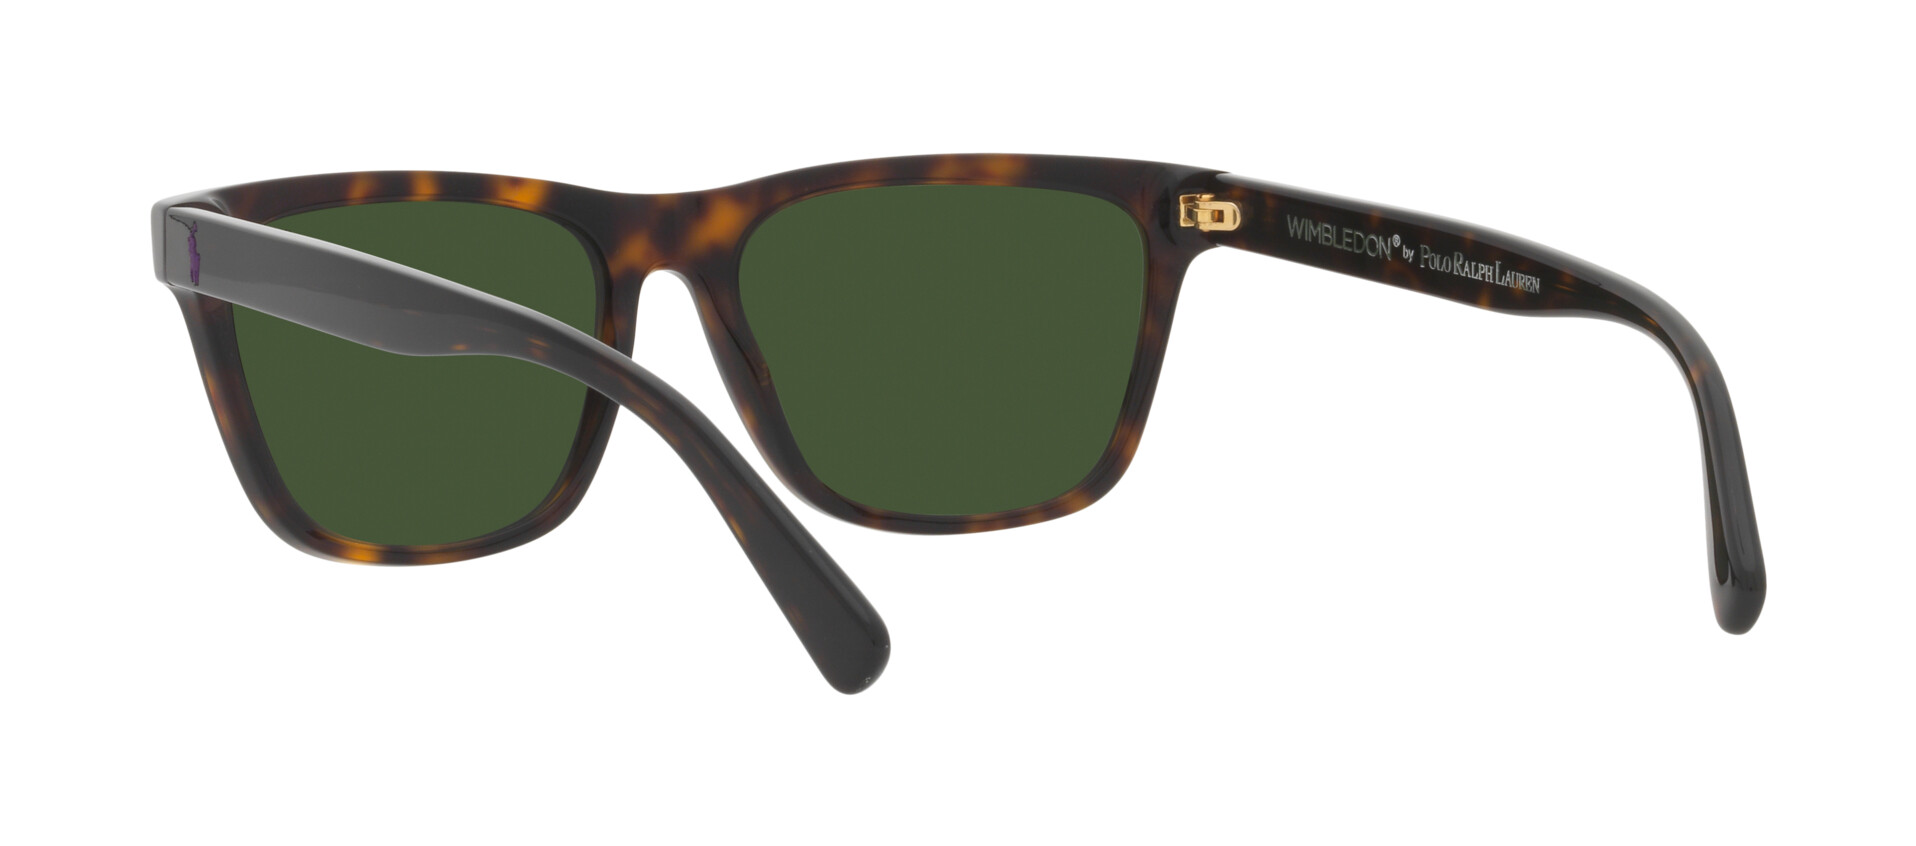 [products.image.folded] Polo Ralph Lauren 0PH4167 500371 Sonnenbrille